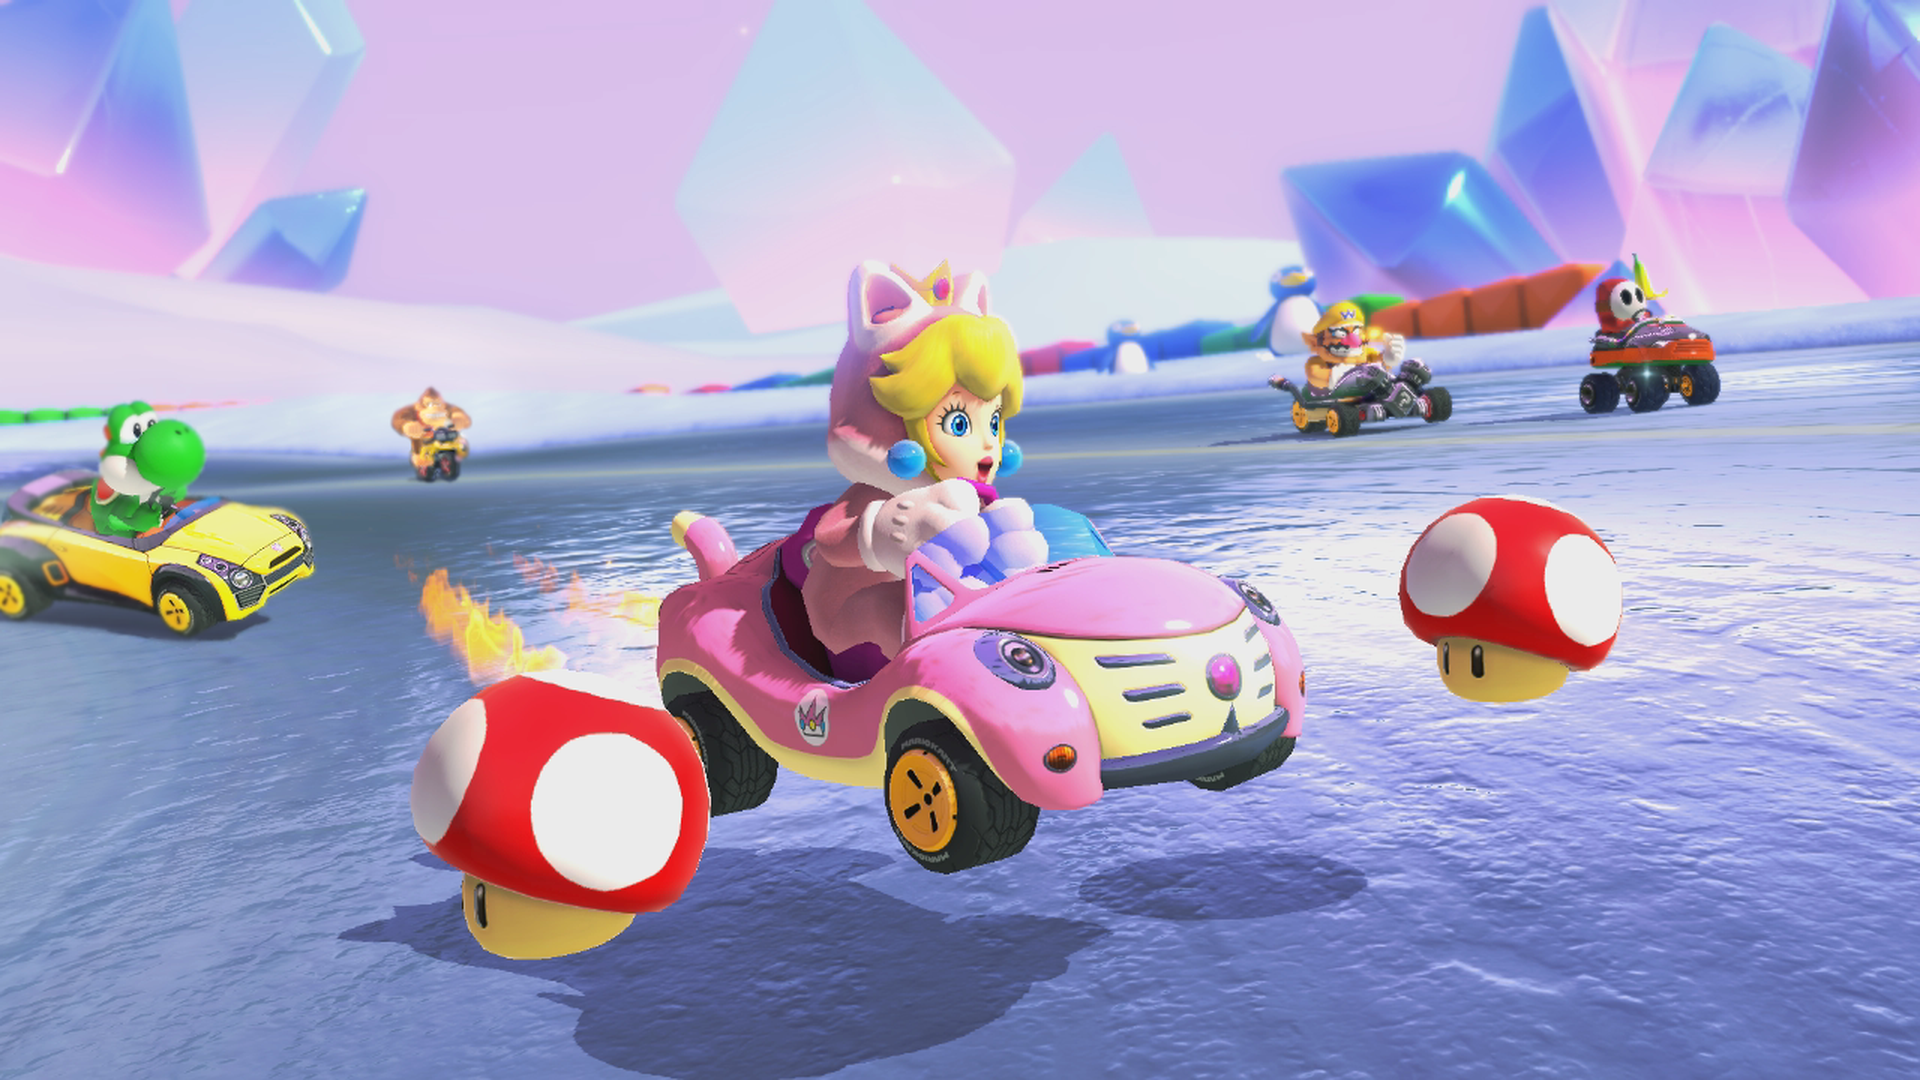 Video game screenshot of a blonde princess in a pink car racing against other Nintendo characters